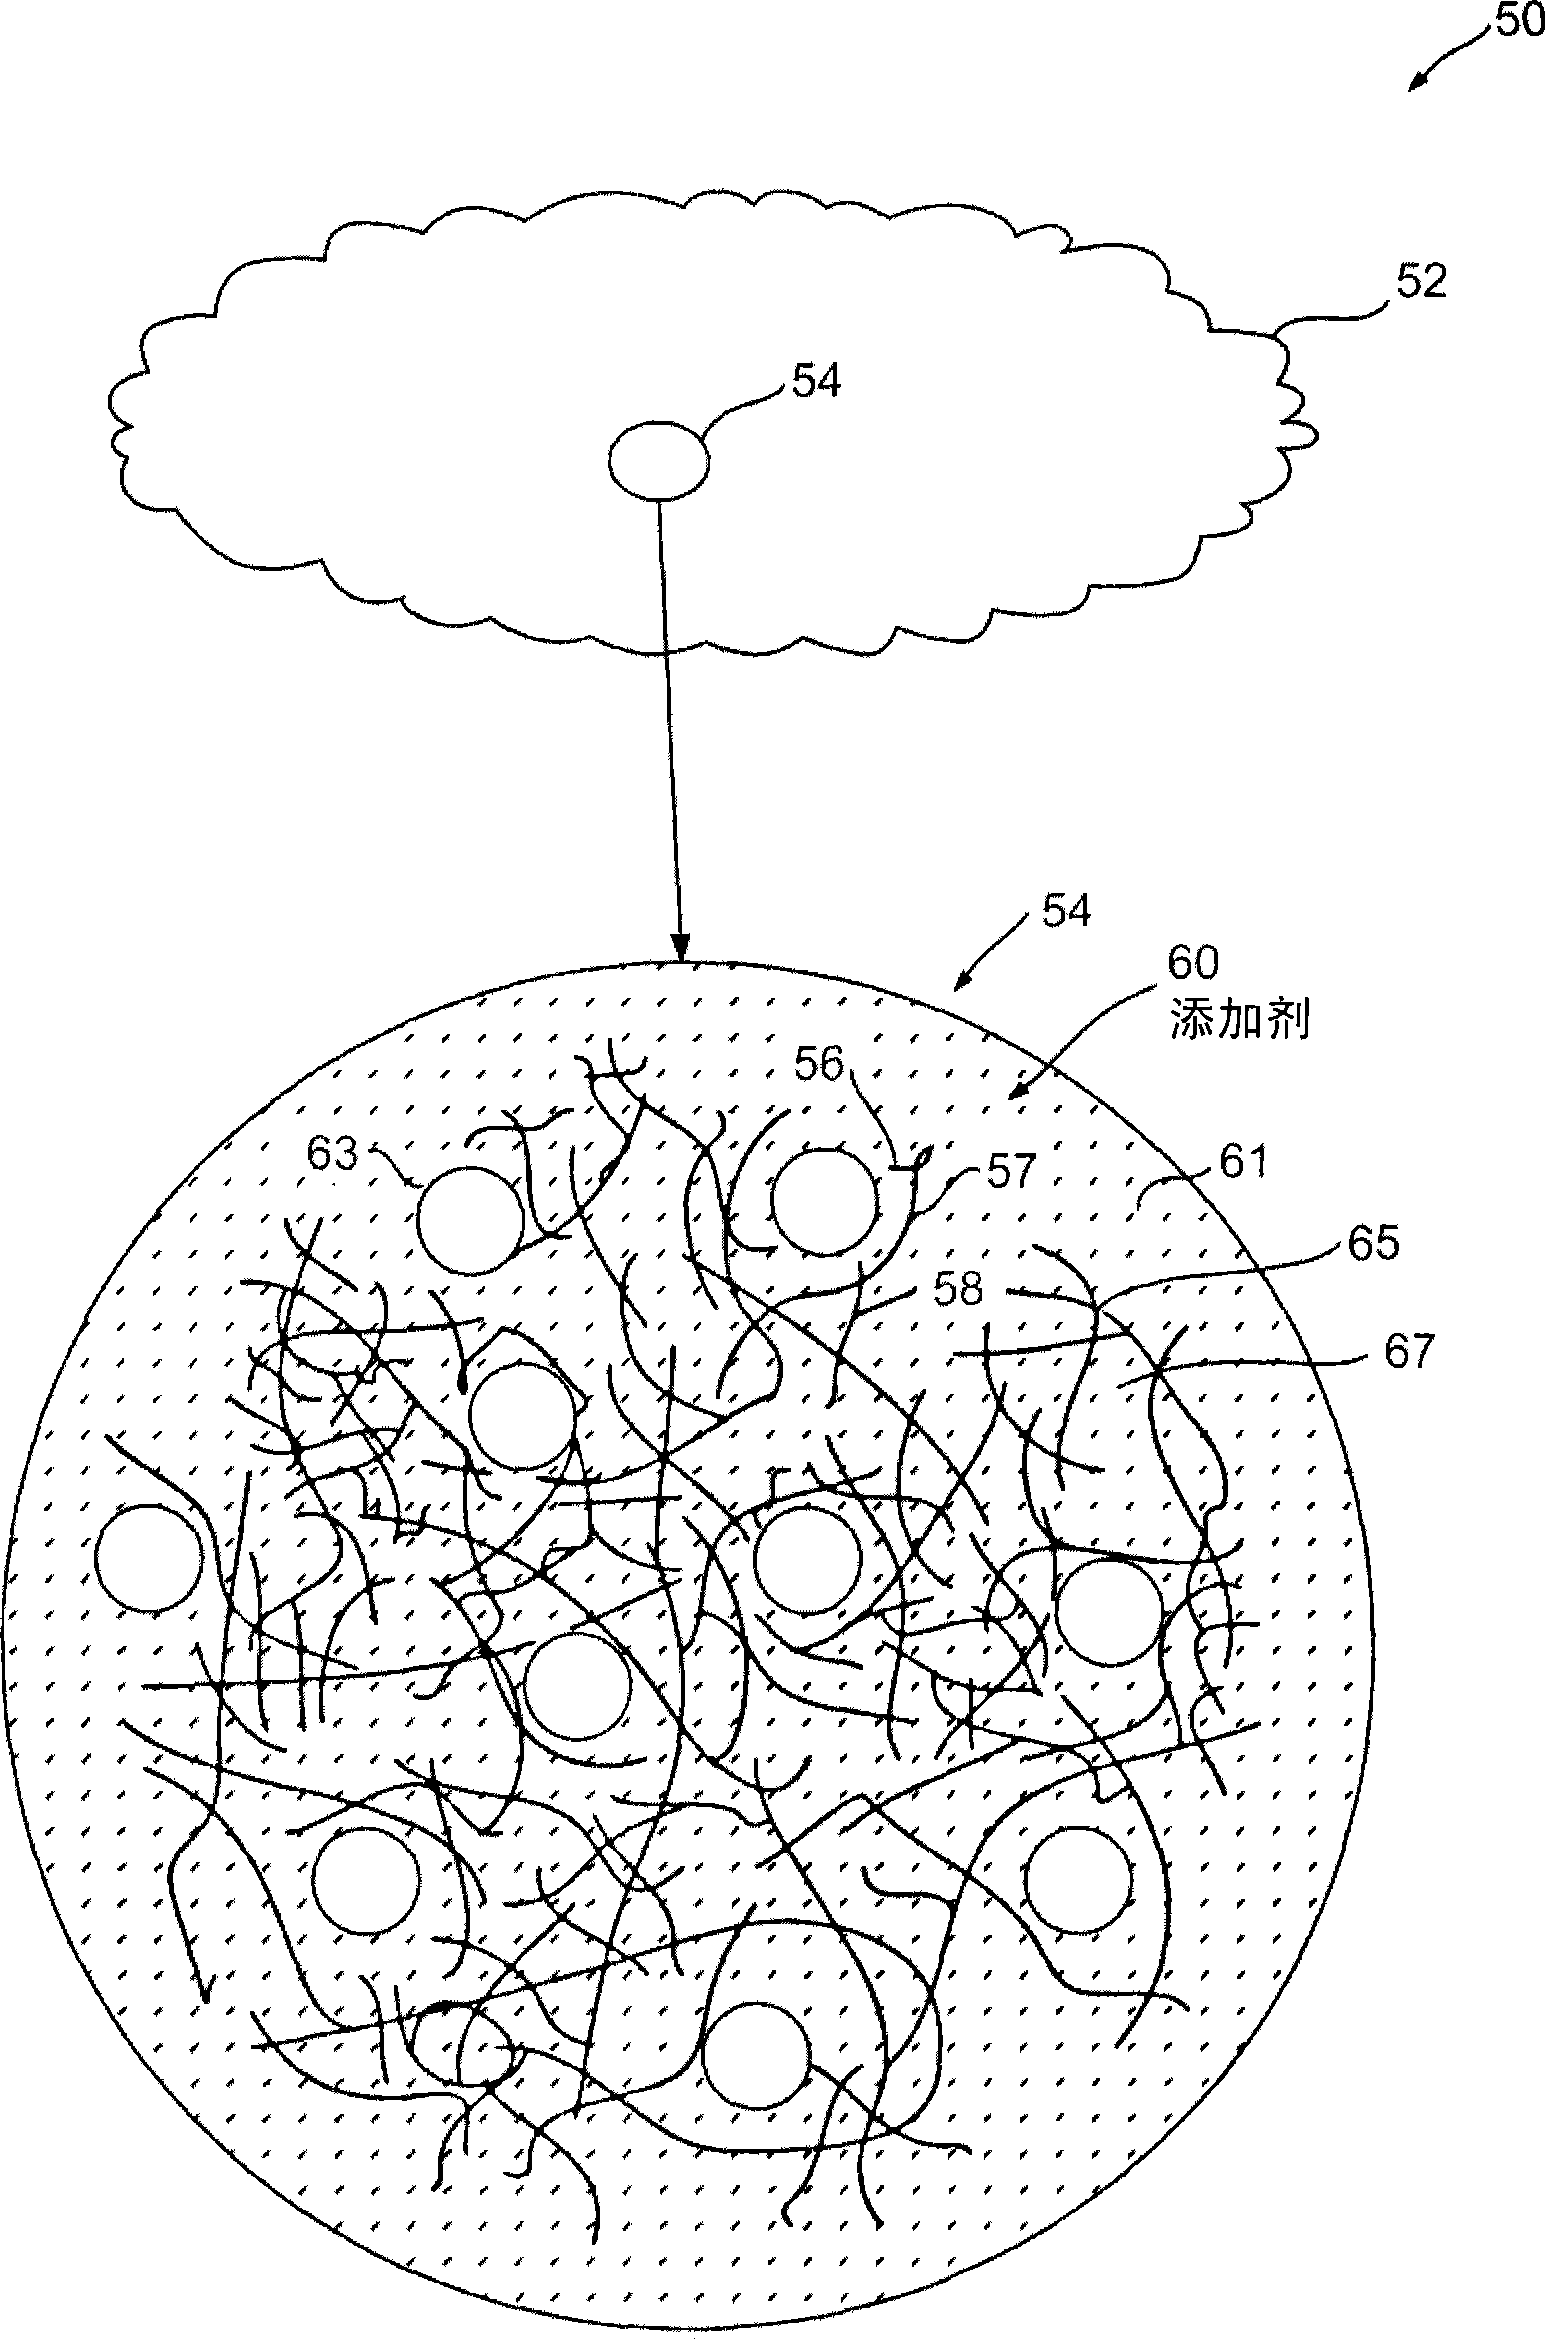 An extruded porous substrate having inorganic bonds